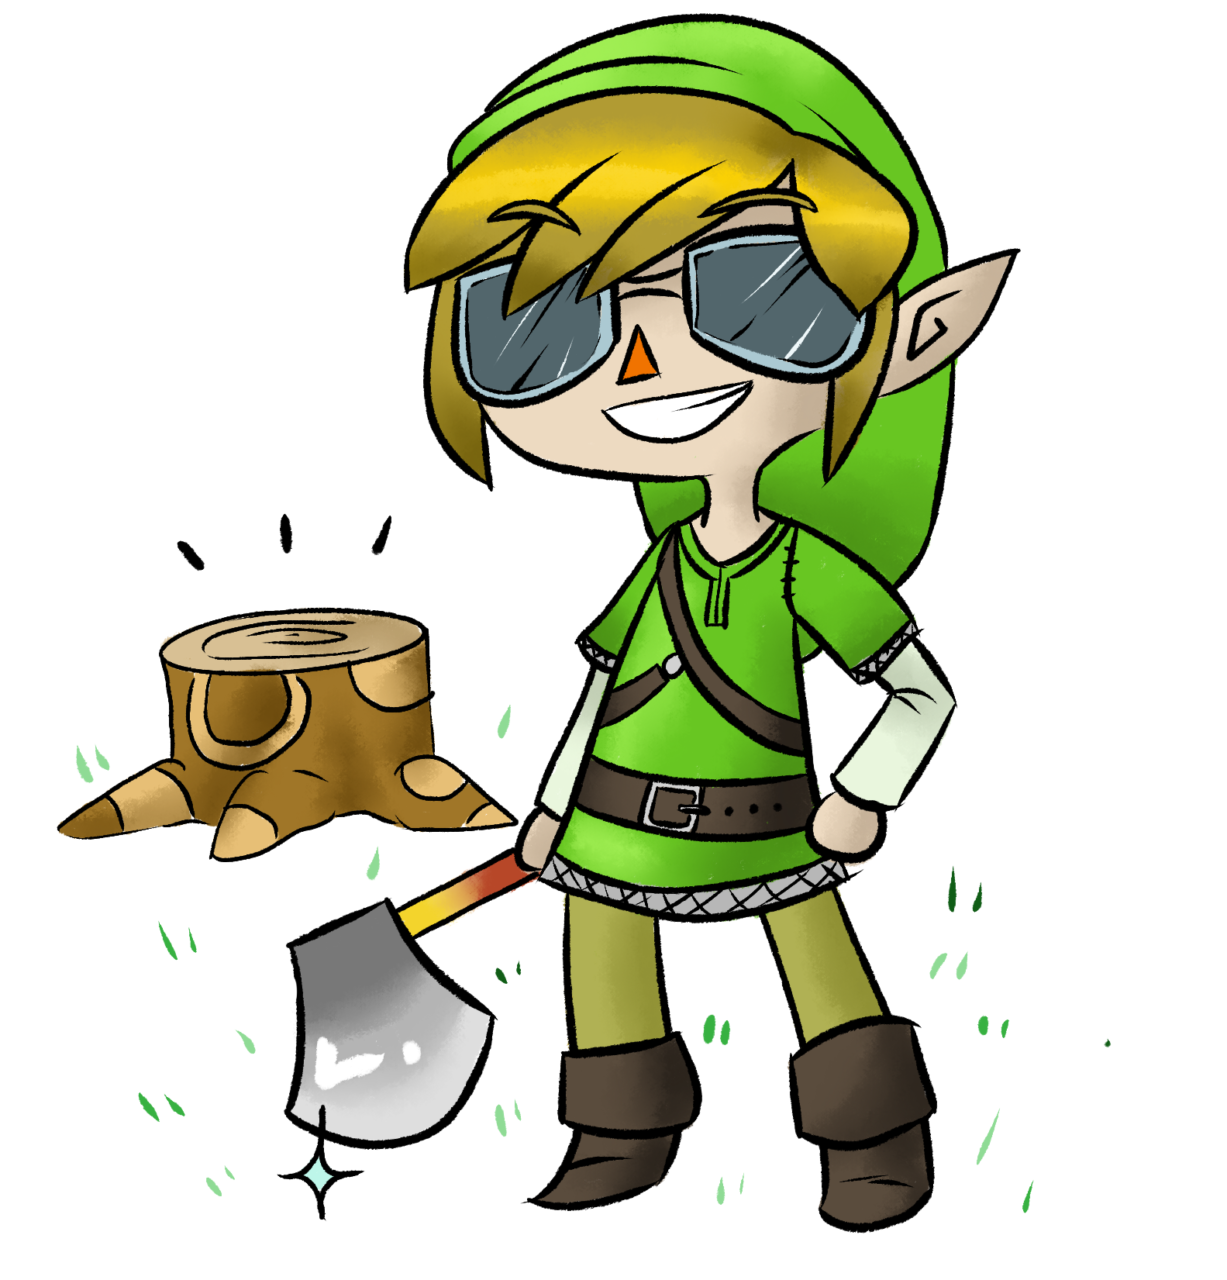 Link Casually Looks for Adventure